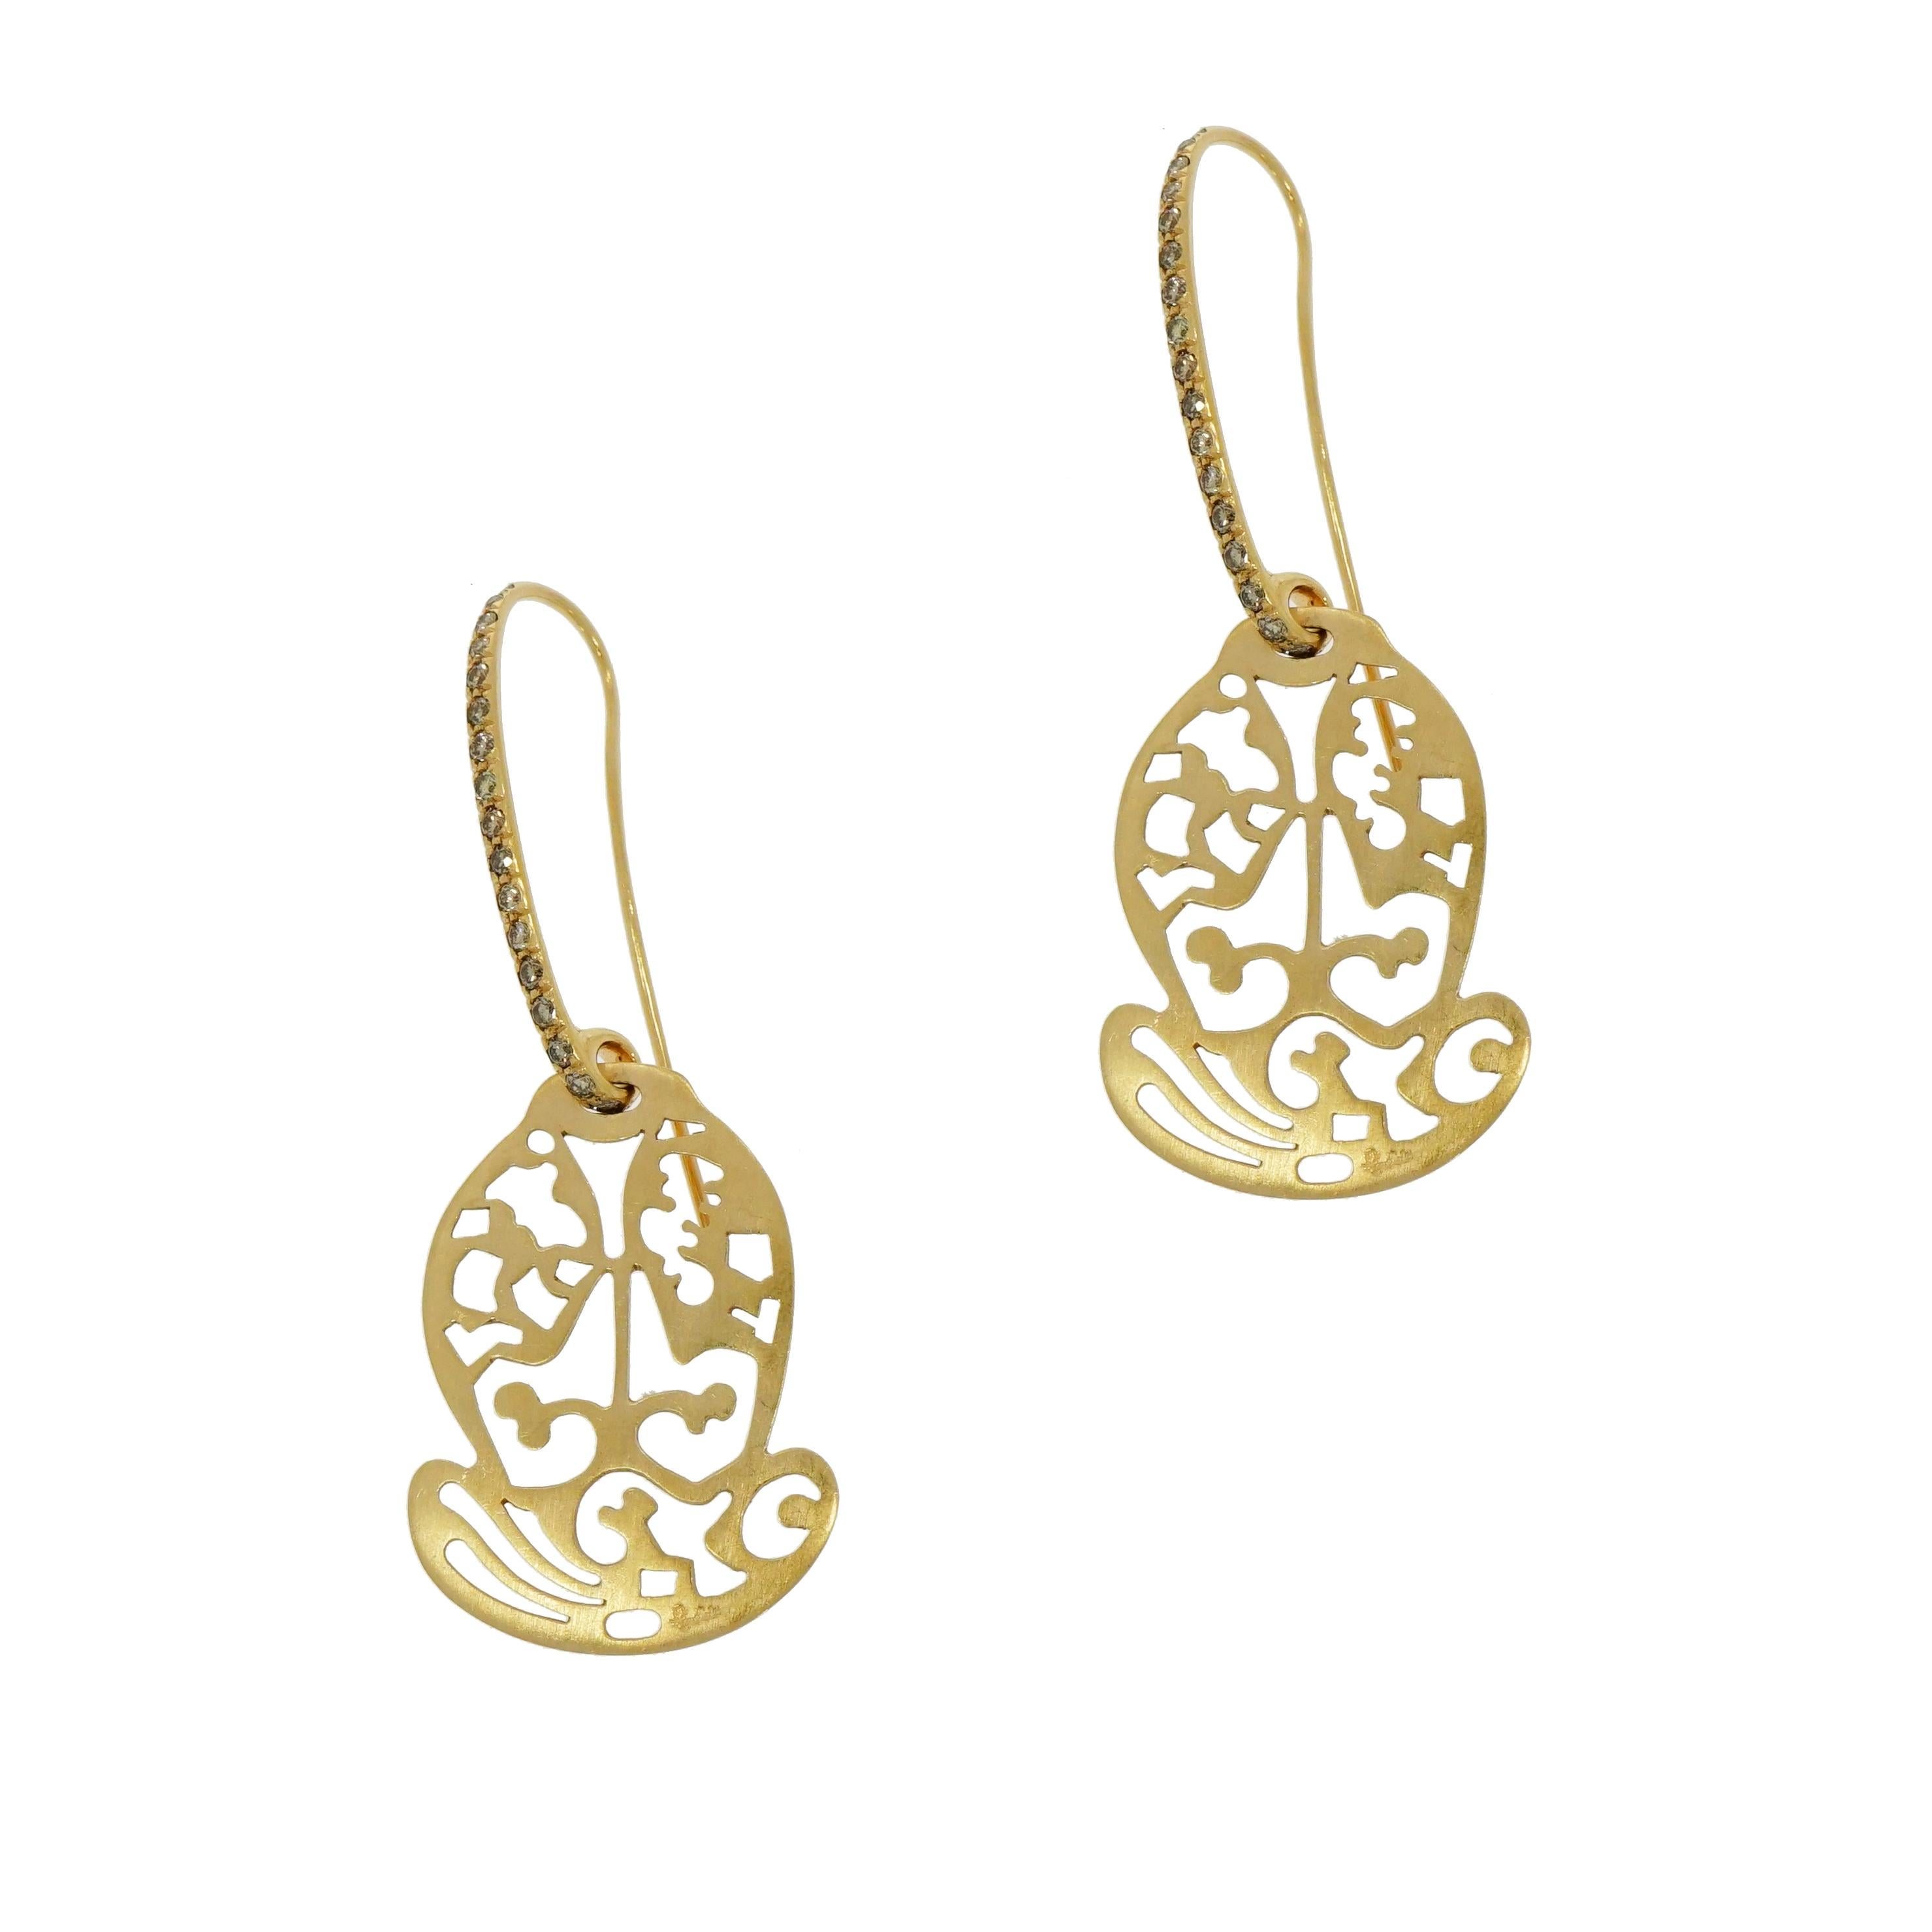 Pomellato is synonymous of creativity and color with the philosophy of the traditionally conservative world of jewelry with a powerful, fashion-forward identity. 
This distinctive acorn design in 18k rose gold drop earrings are accented with approx.